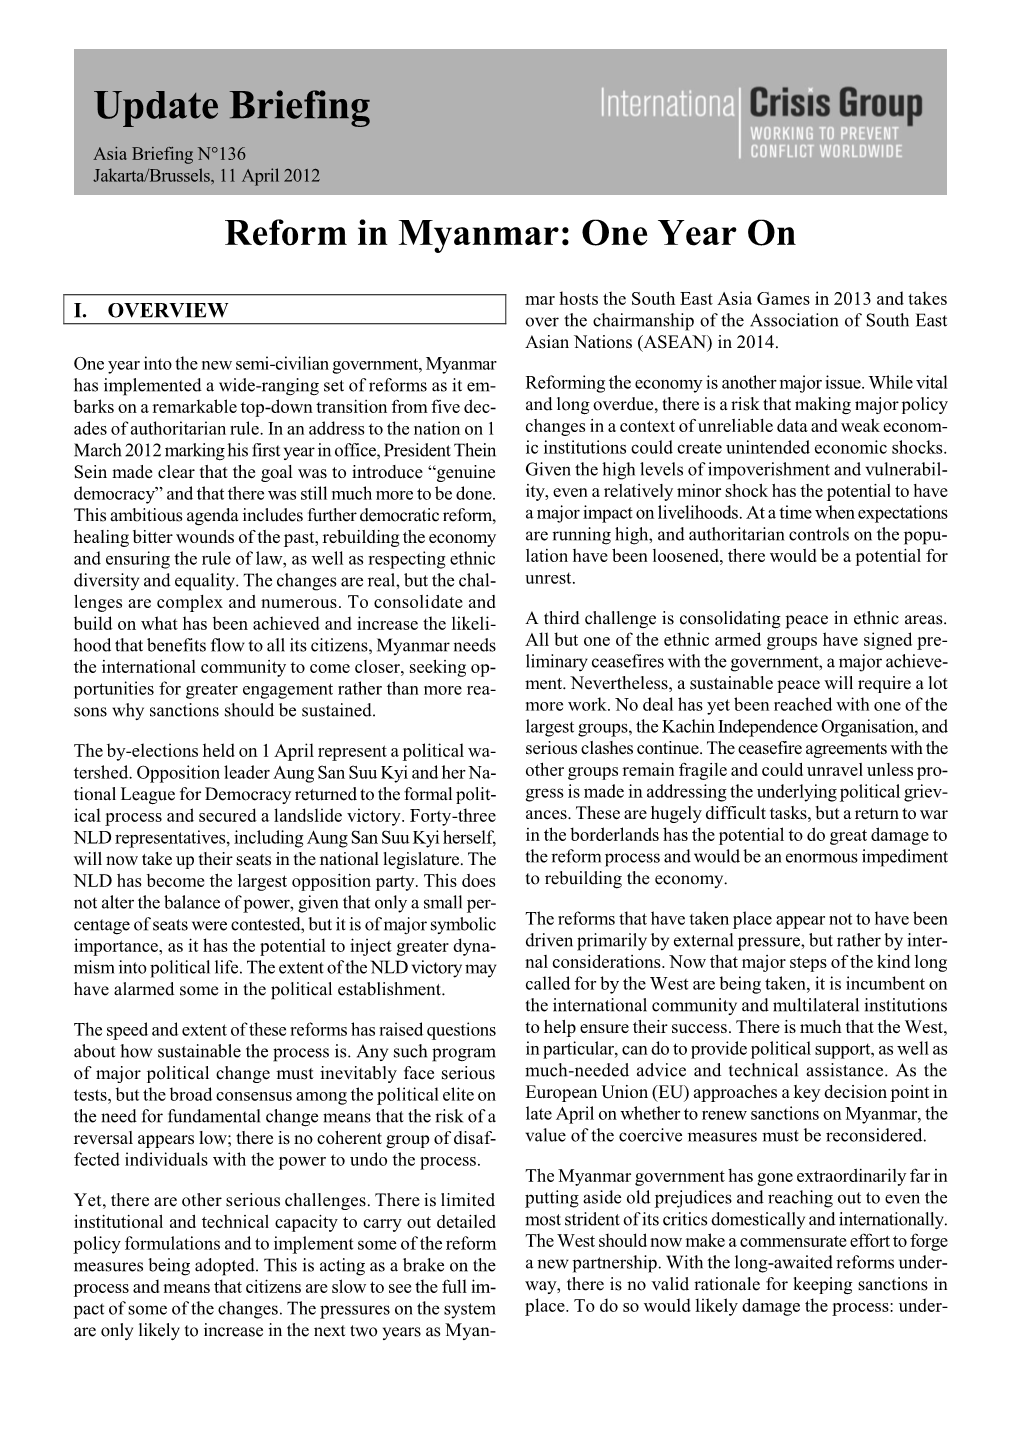 Reform in Myanmar: One Year On